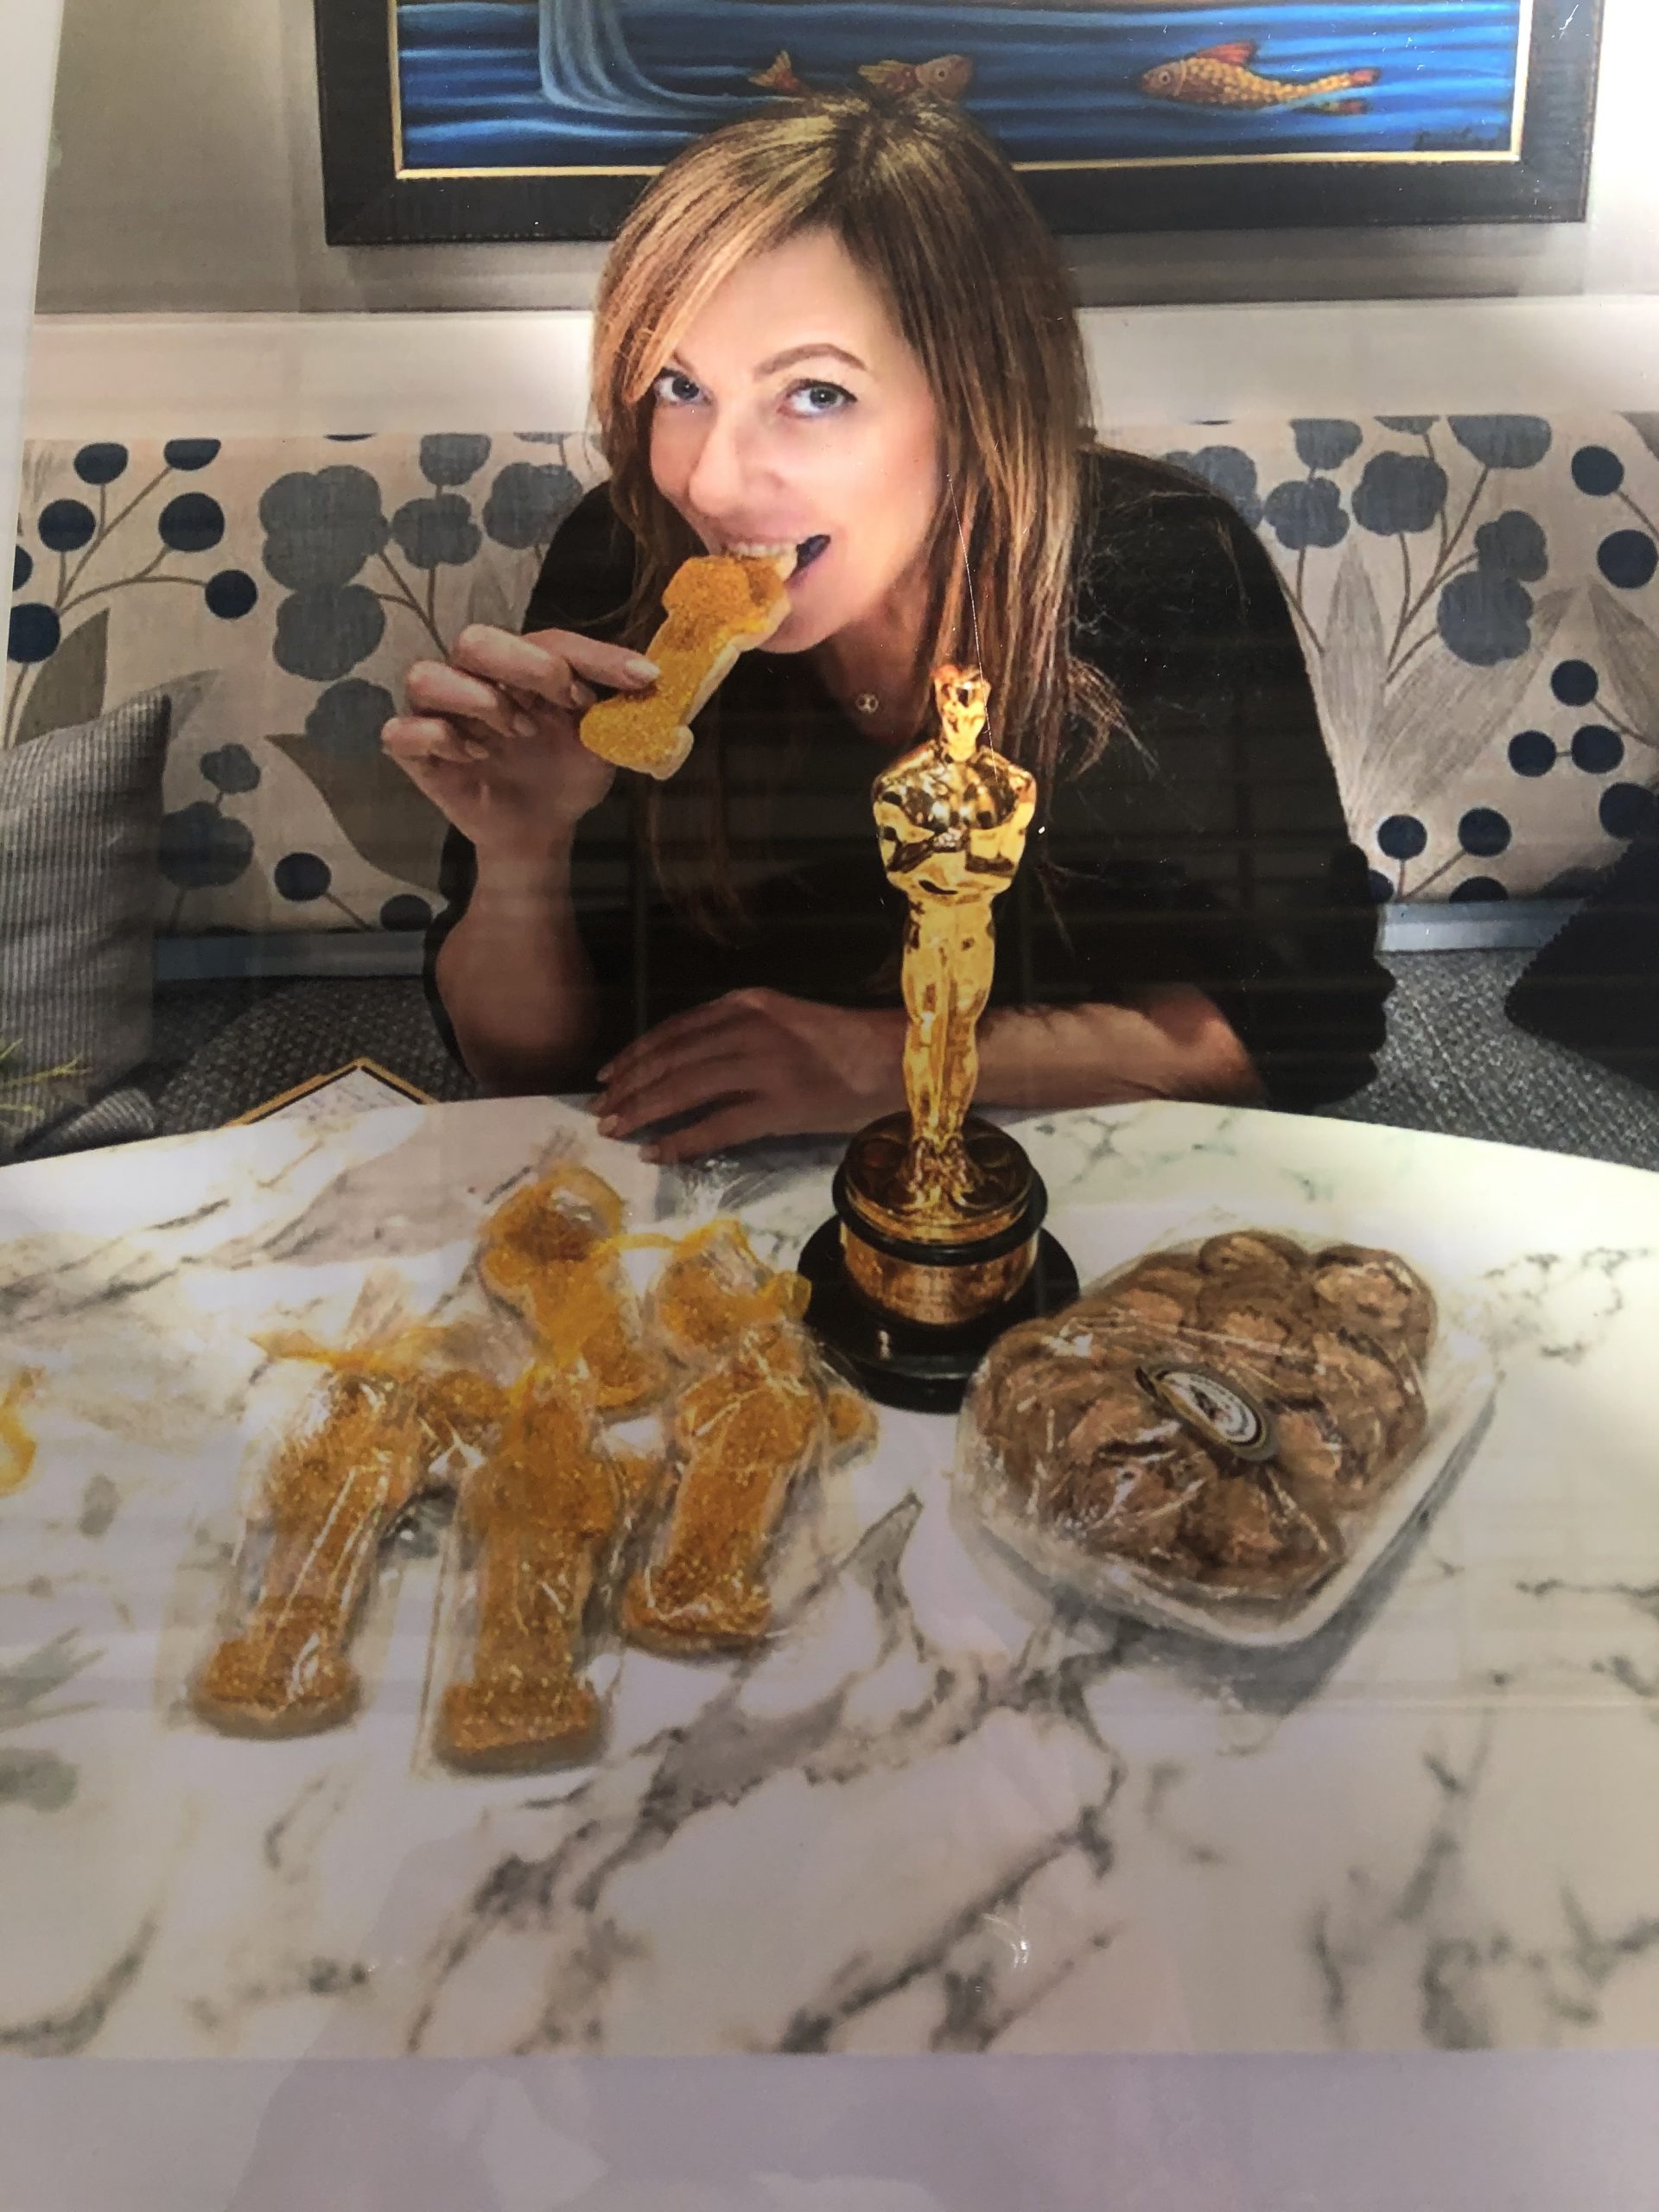 Allison Janney with Cookies